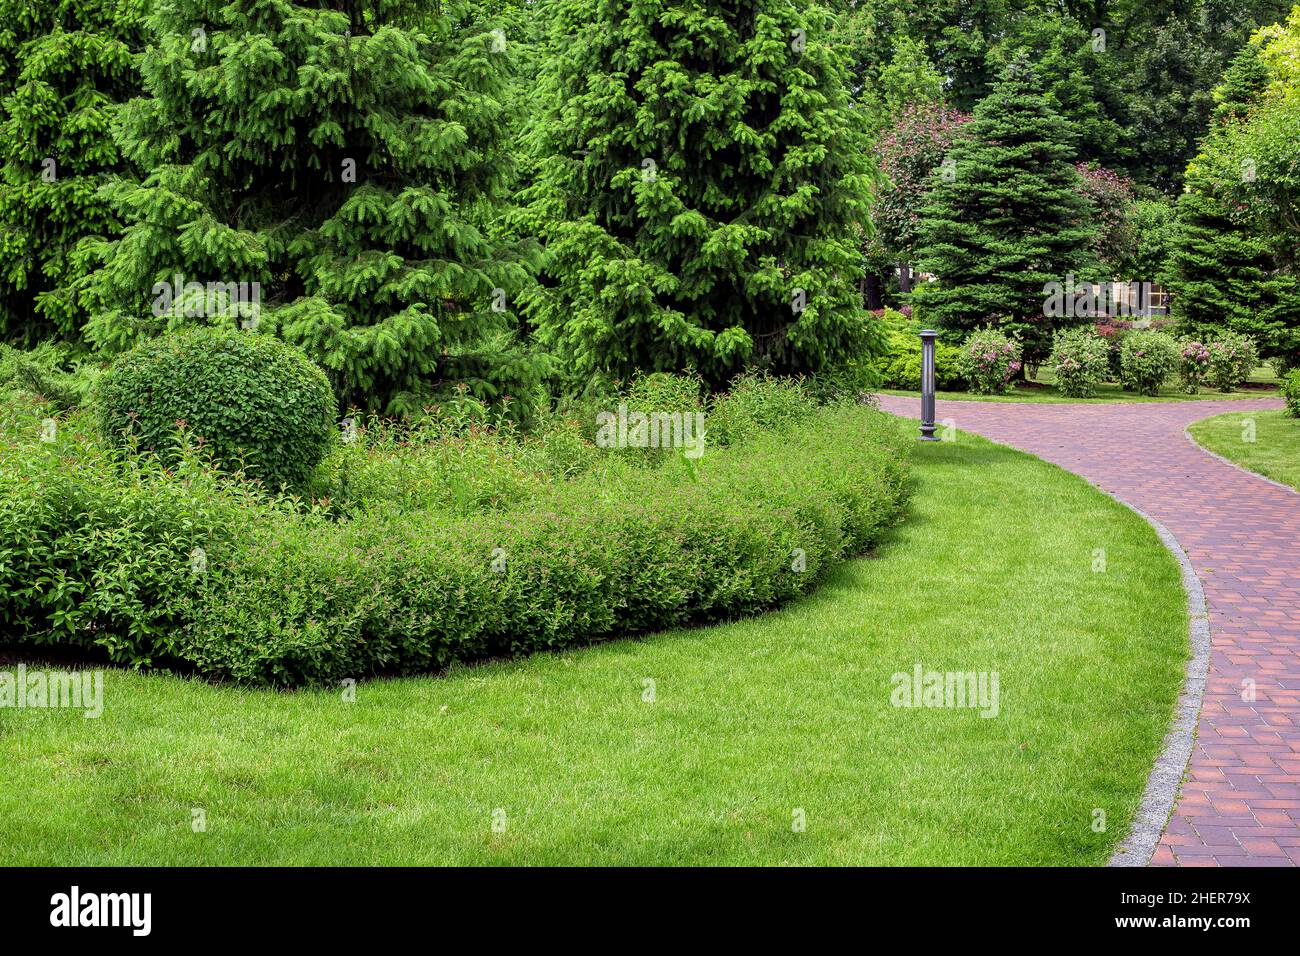 dense pine park with thorny trees and foliage bushes with green grass park landscape with ground lantern near stone tile walkway and green grass, park Stock Photo